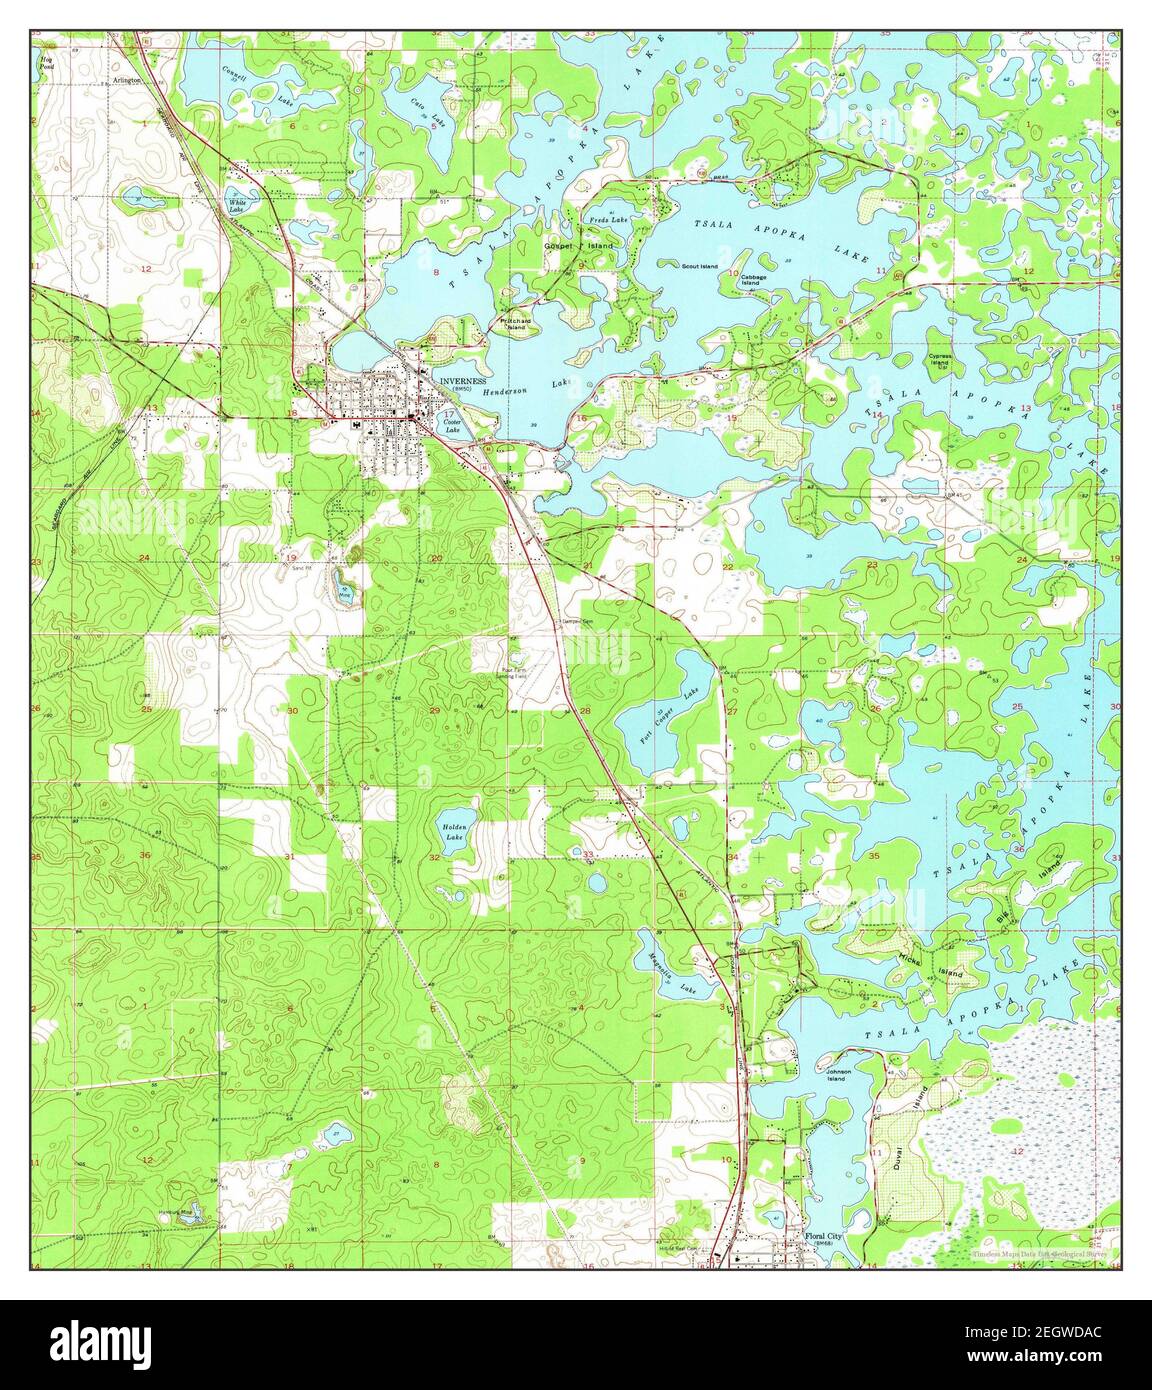 Inverness, Florida, map 1954, 1:24000, United States of America by Timeless Maps, data U.S. Geological Survey Stock Photo